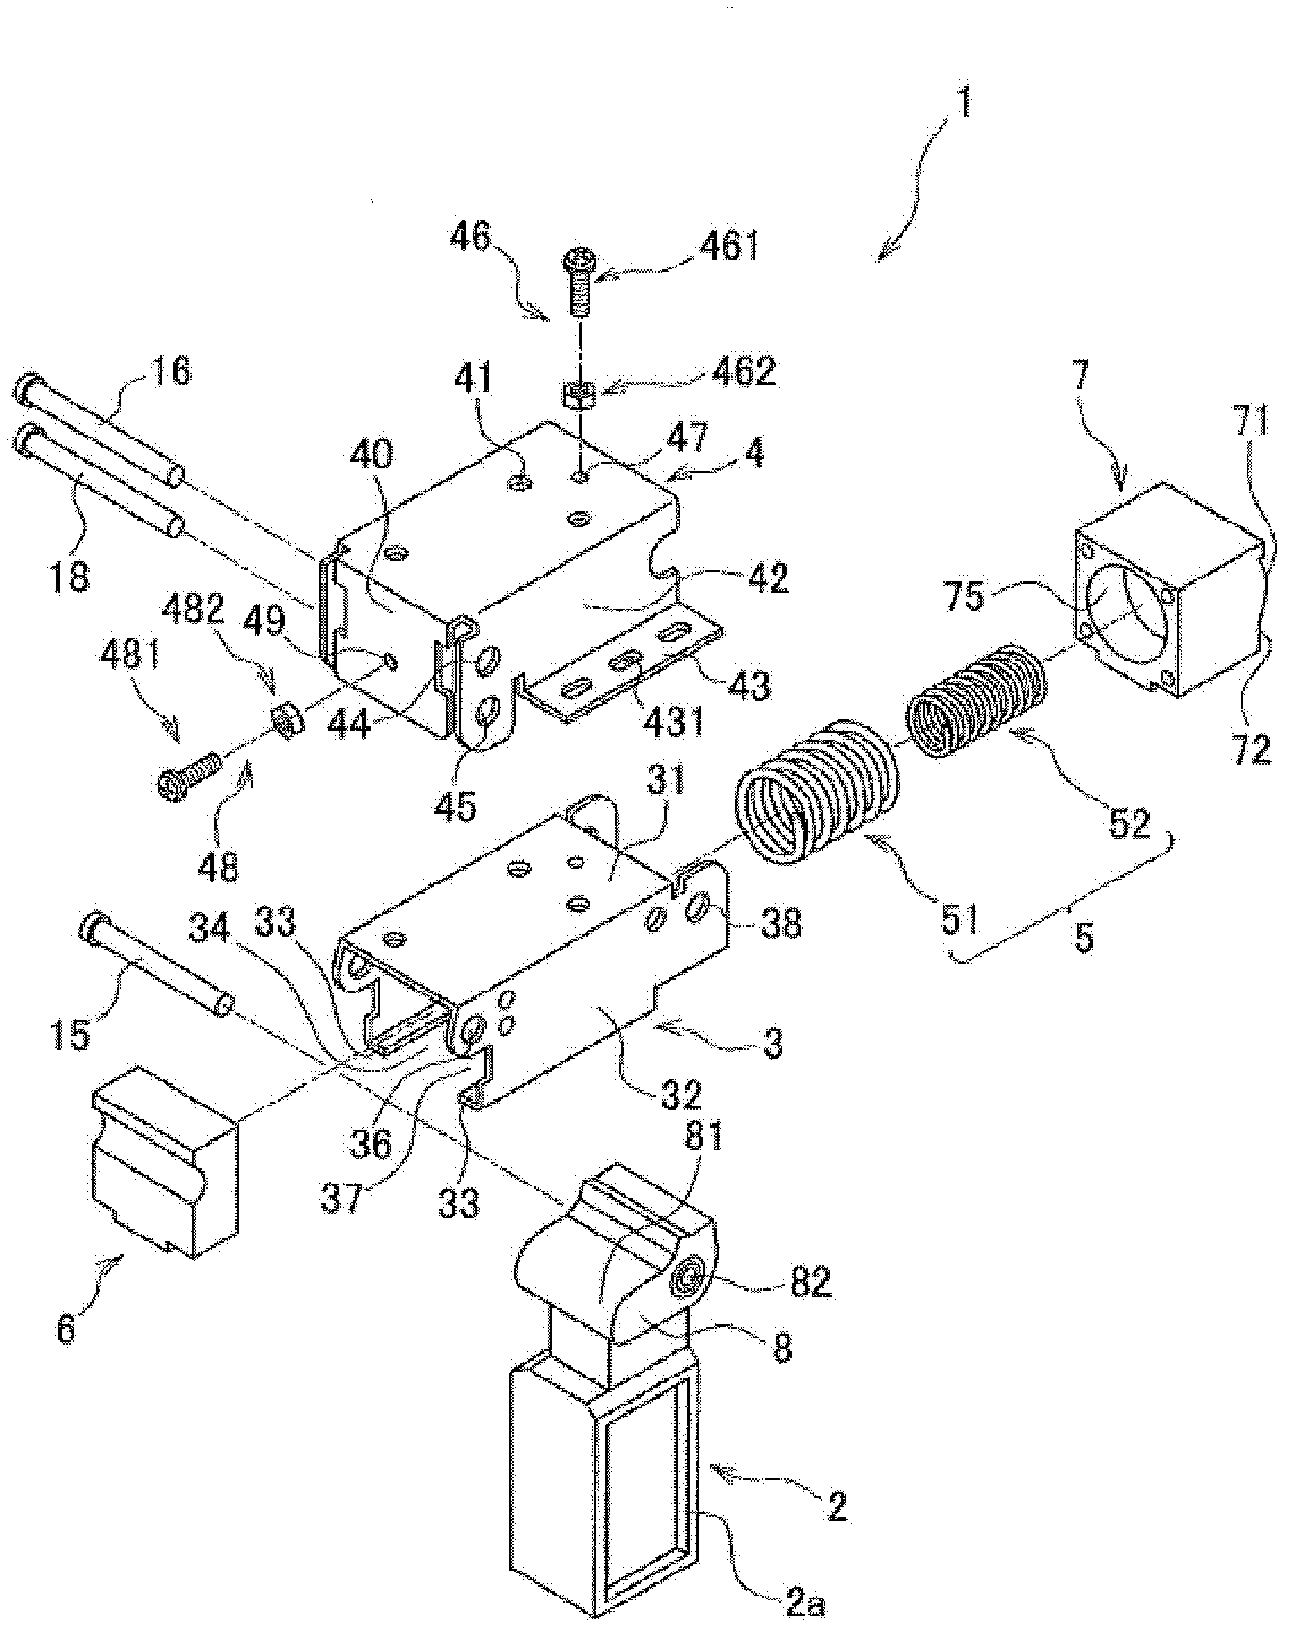 Device for opening and closing manuscript pressing plate and office machine